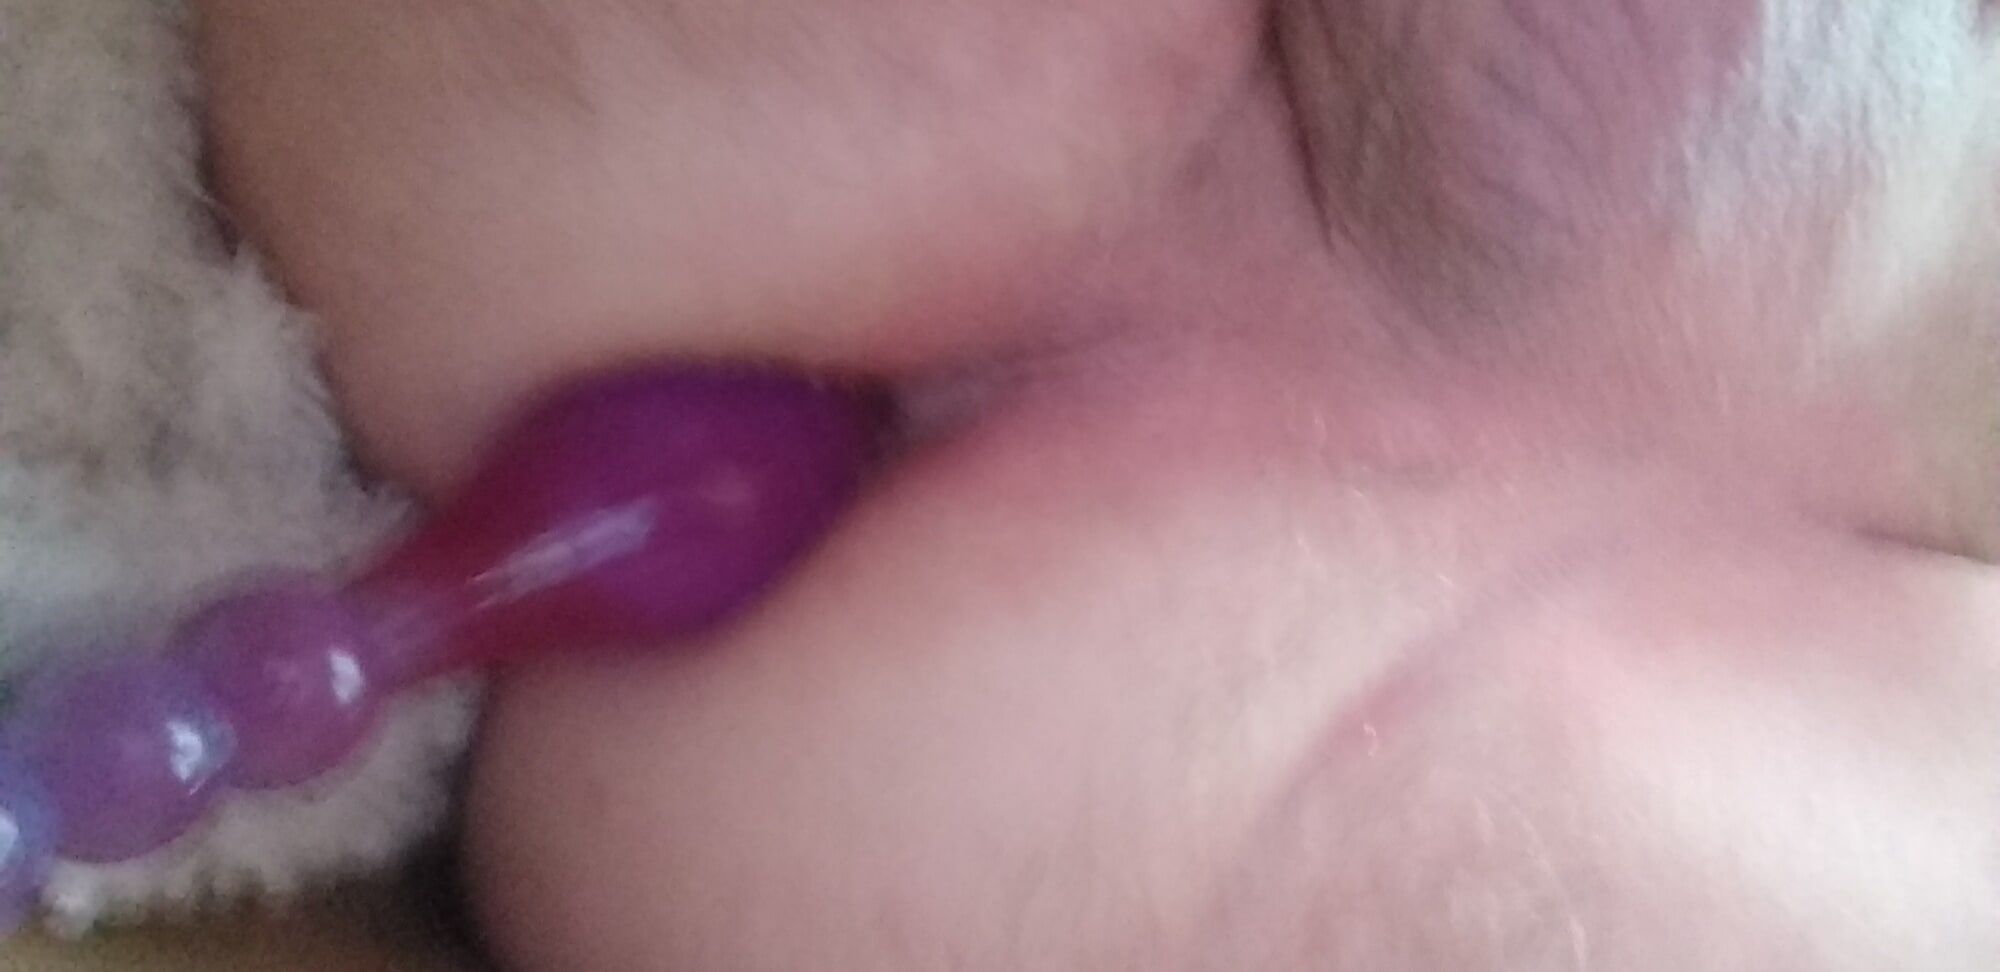 lying in bed and playing with a dildo in my ass and playing  #8